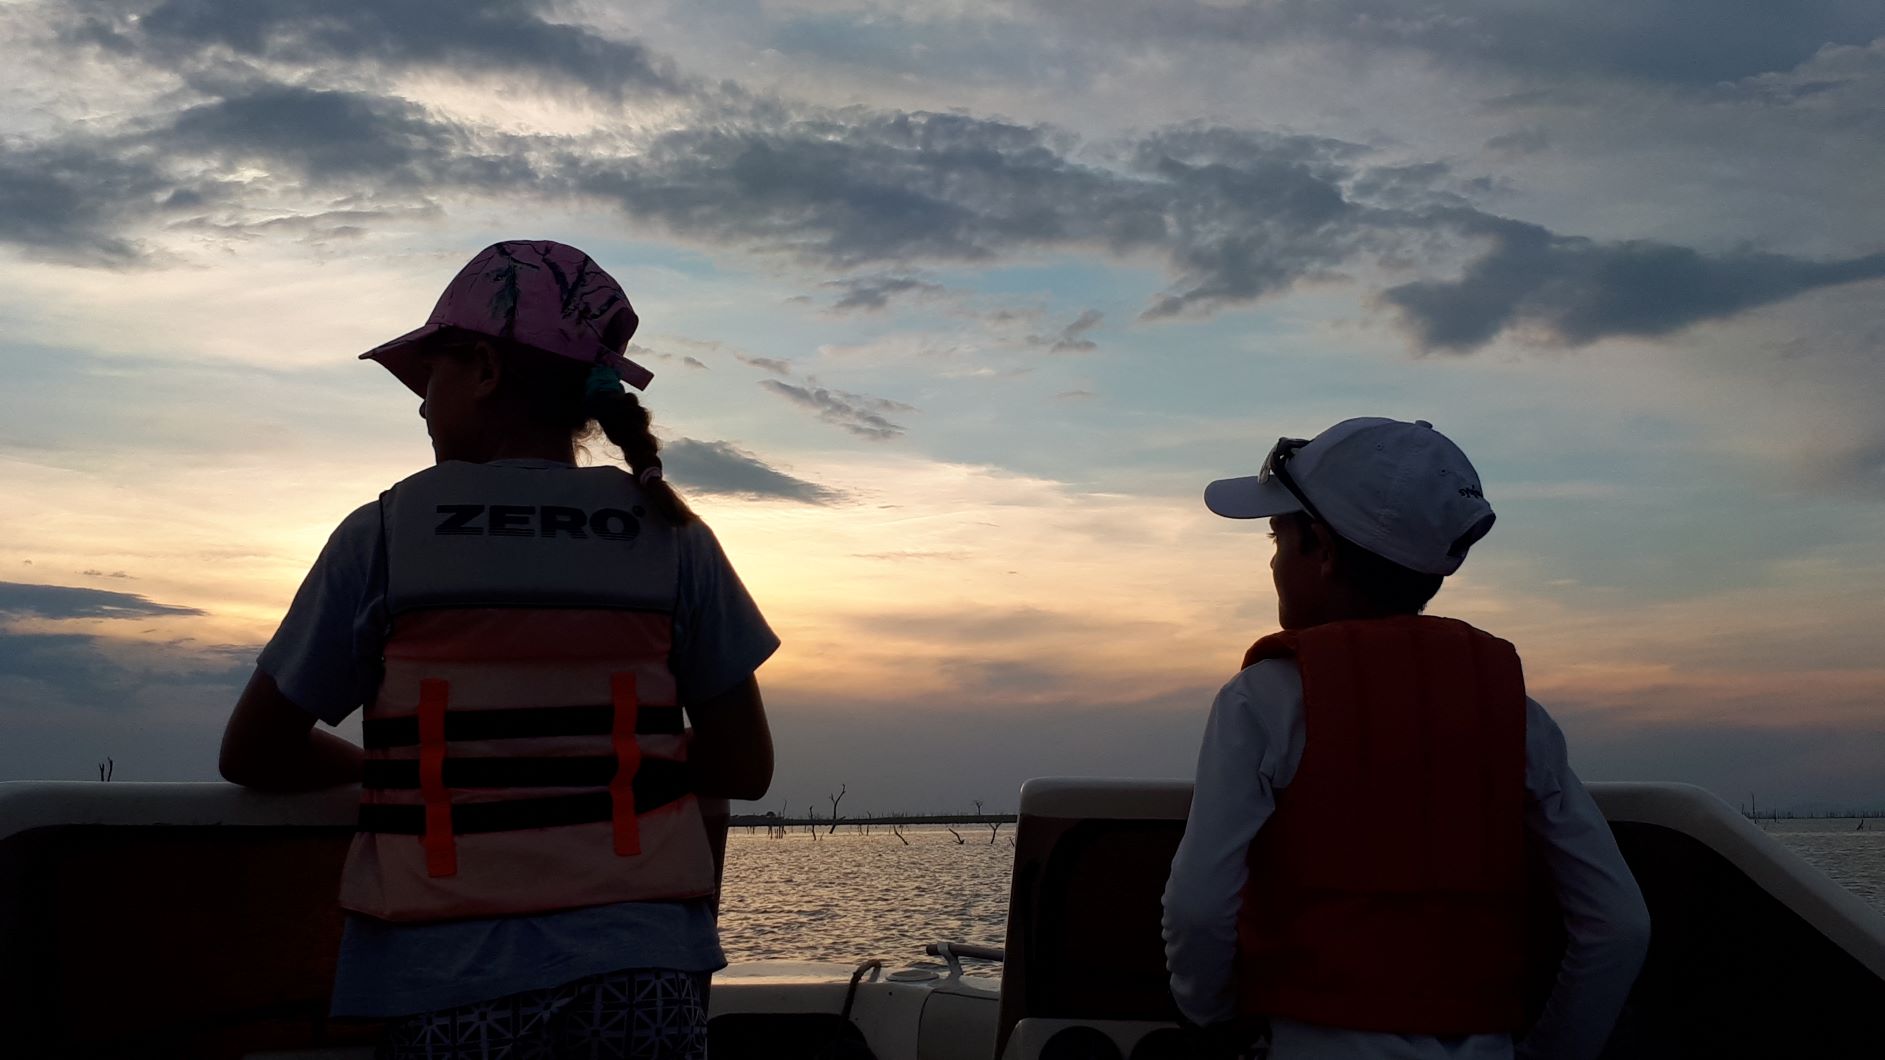 Children driving the boat at sunset.